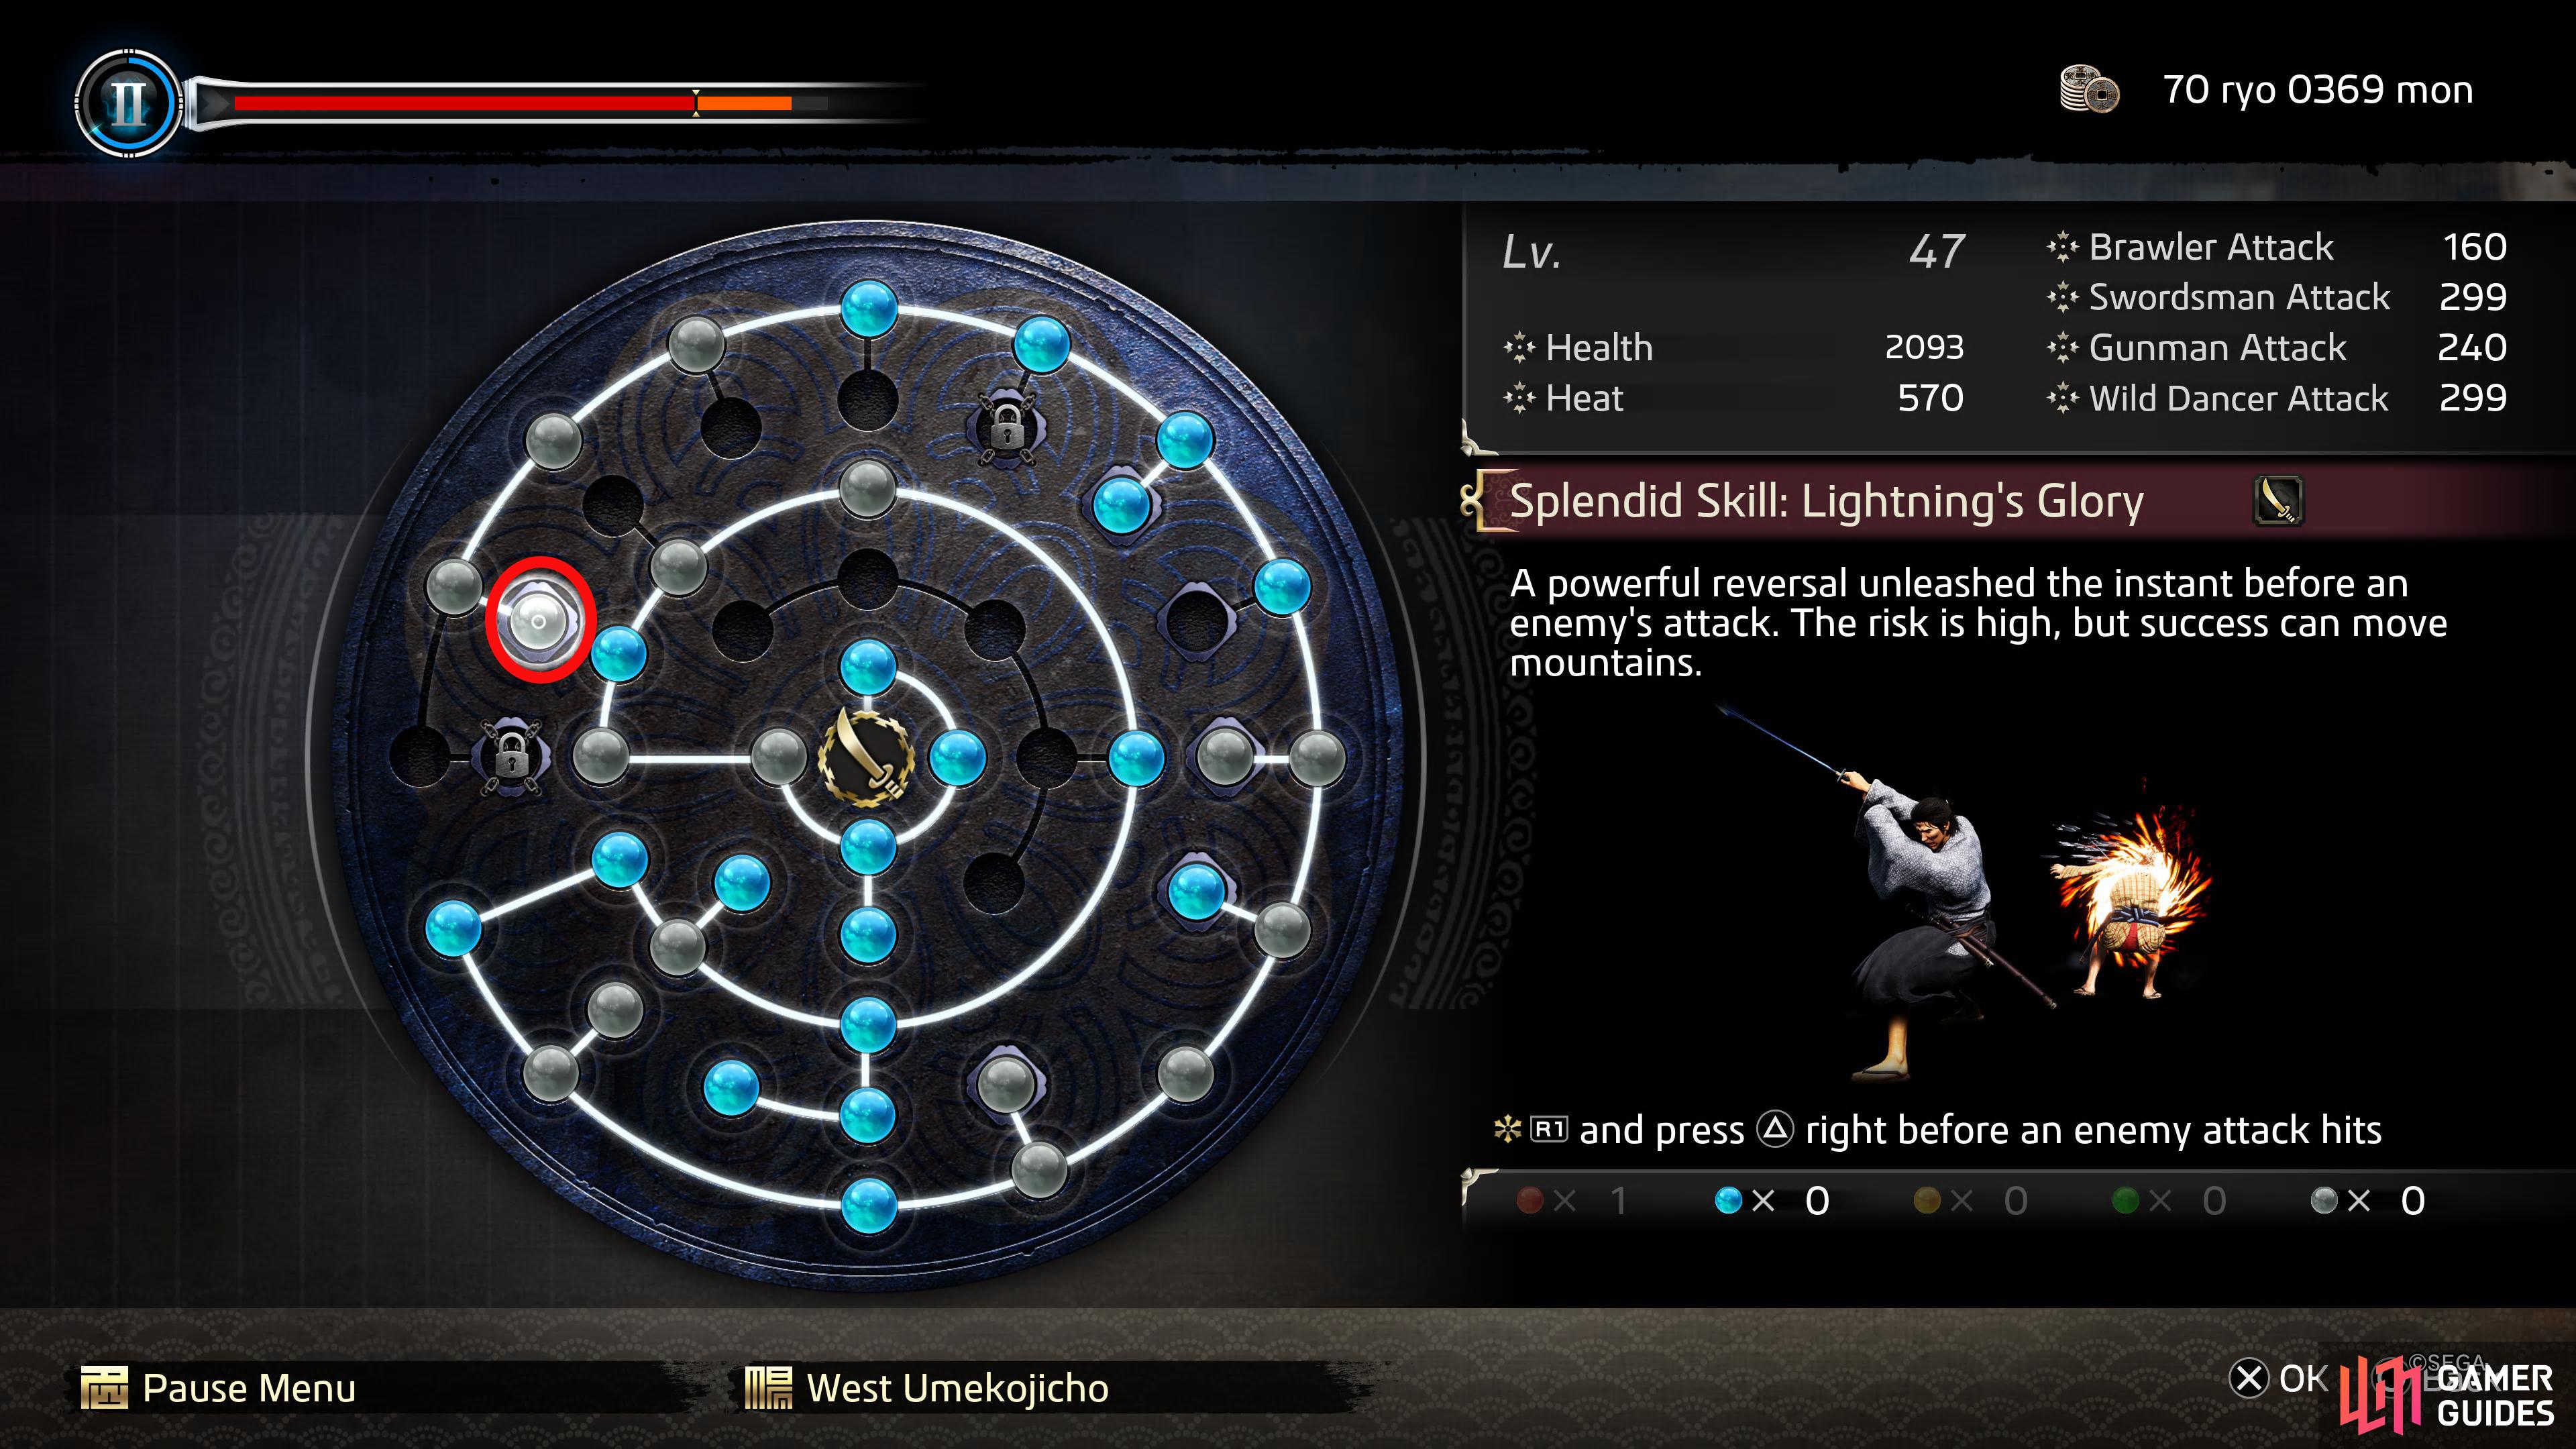 Here is where Lightning’s Glory appears on the Ability Wheel.